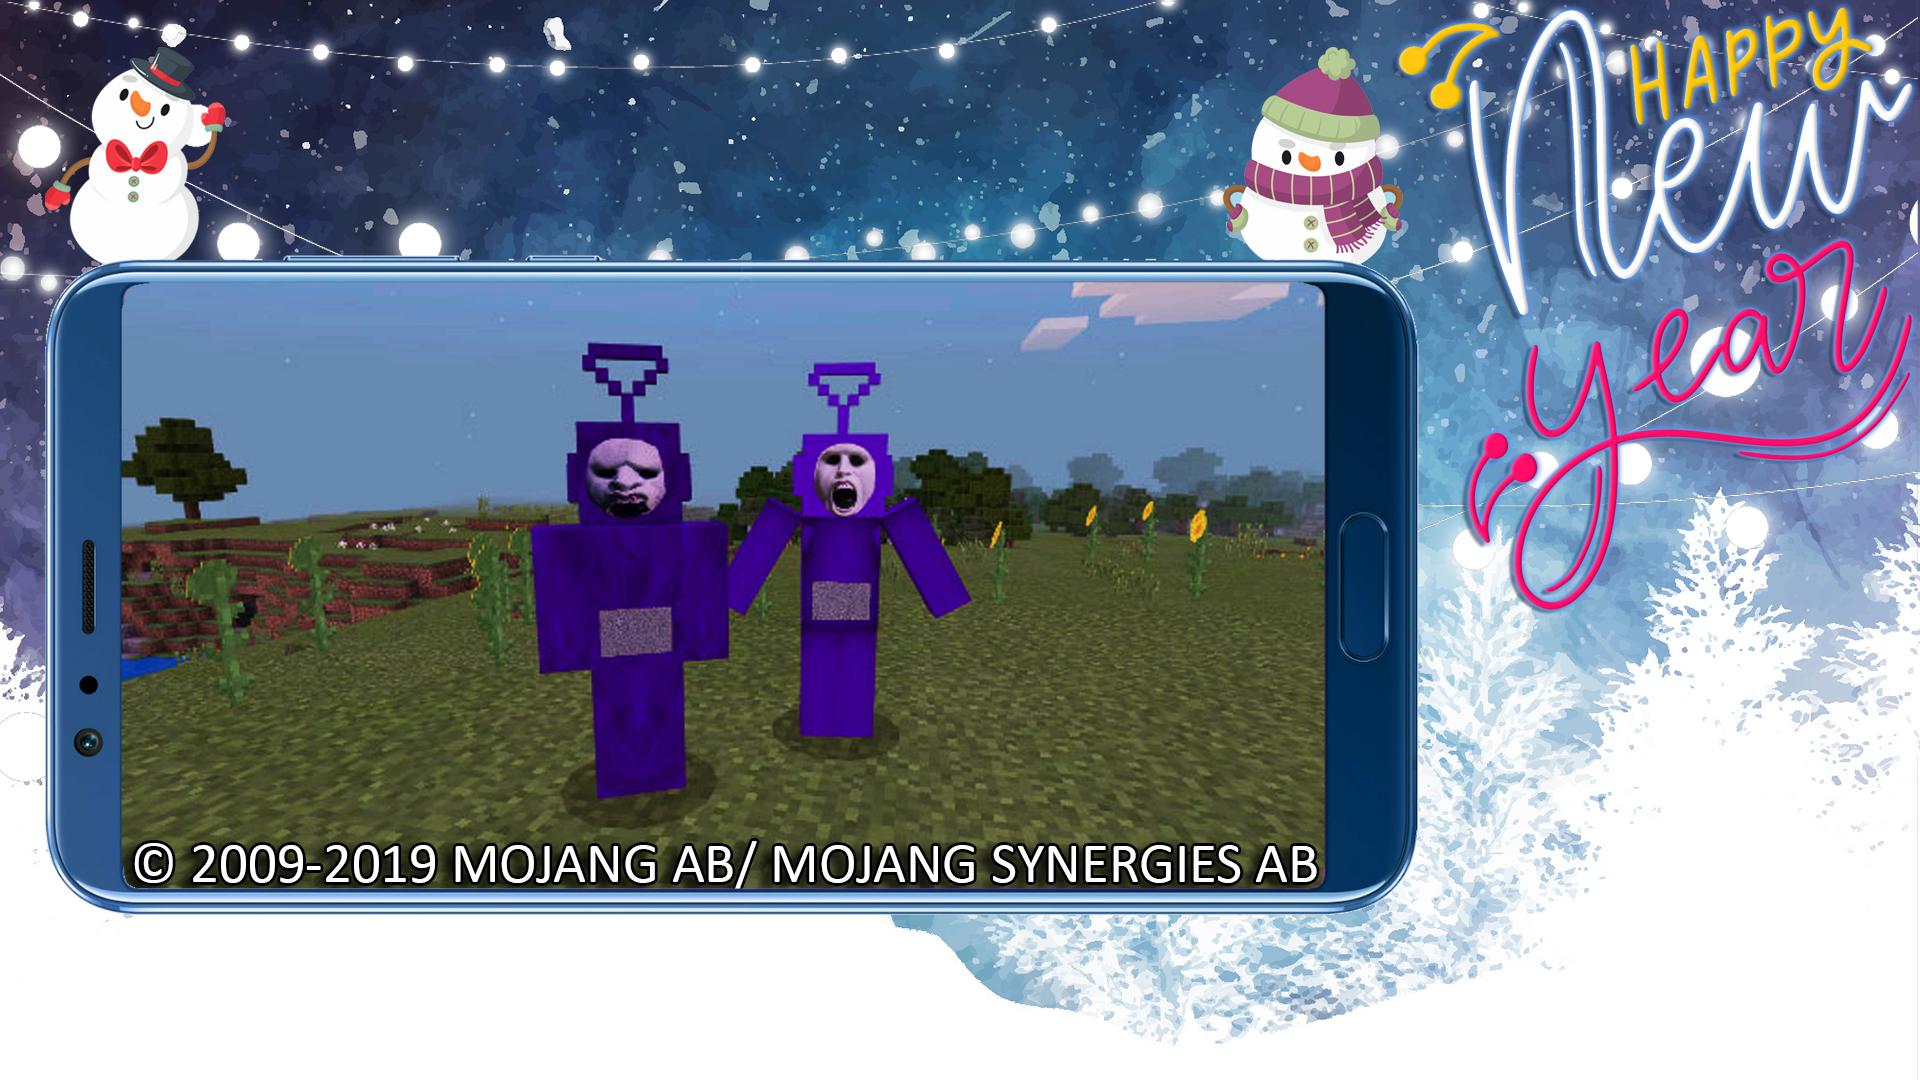 Mod Horror Slendytubbies Craft For Android Apk Download - roblox 2 slendytubbies iii slendytubbies attack youtube